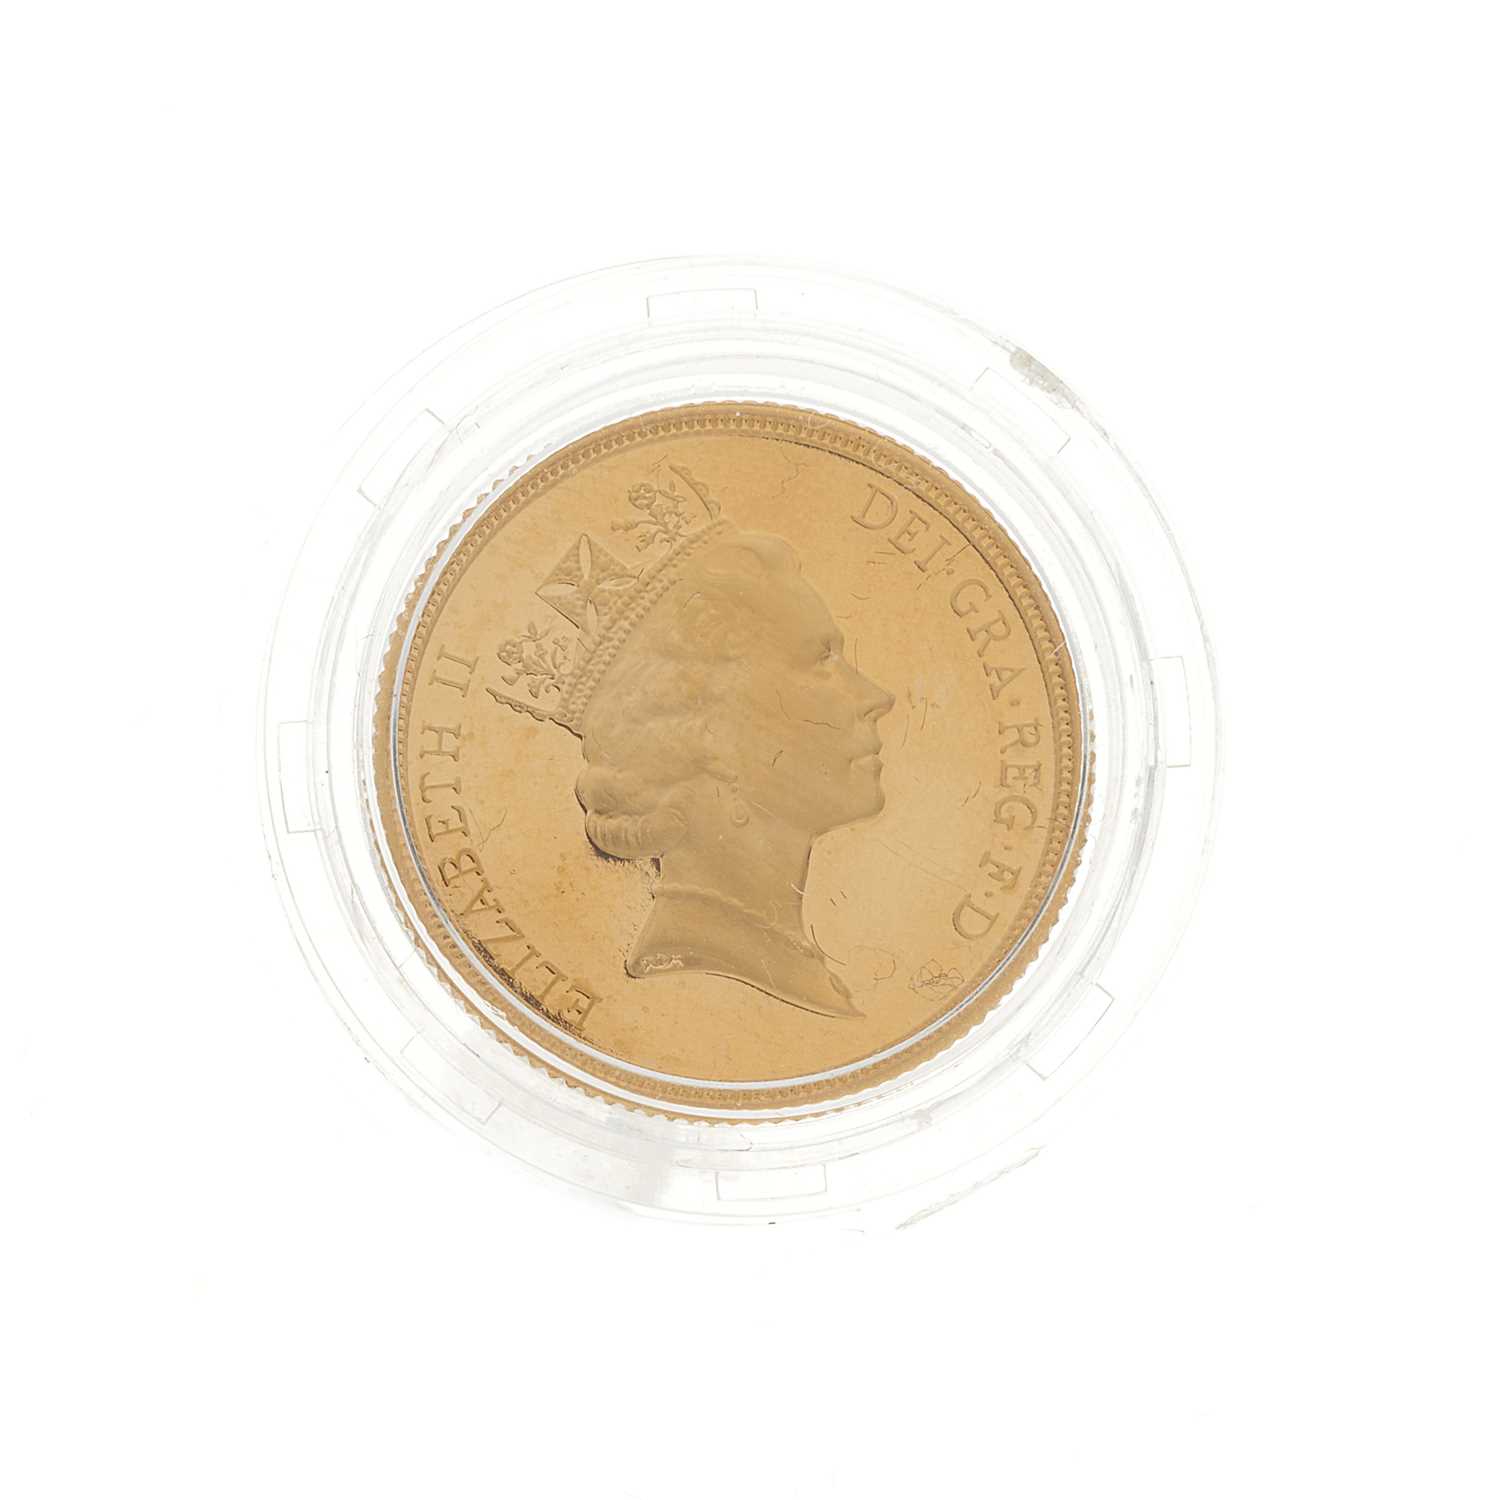 Lot 72 - Elizabeth II, a 1997 gold proof full sovereign coin